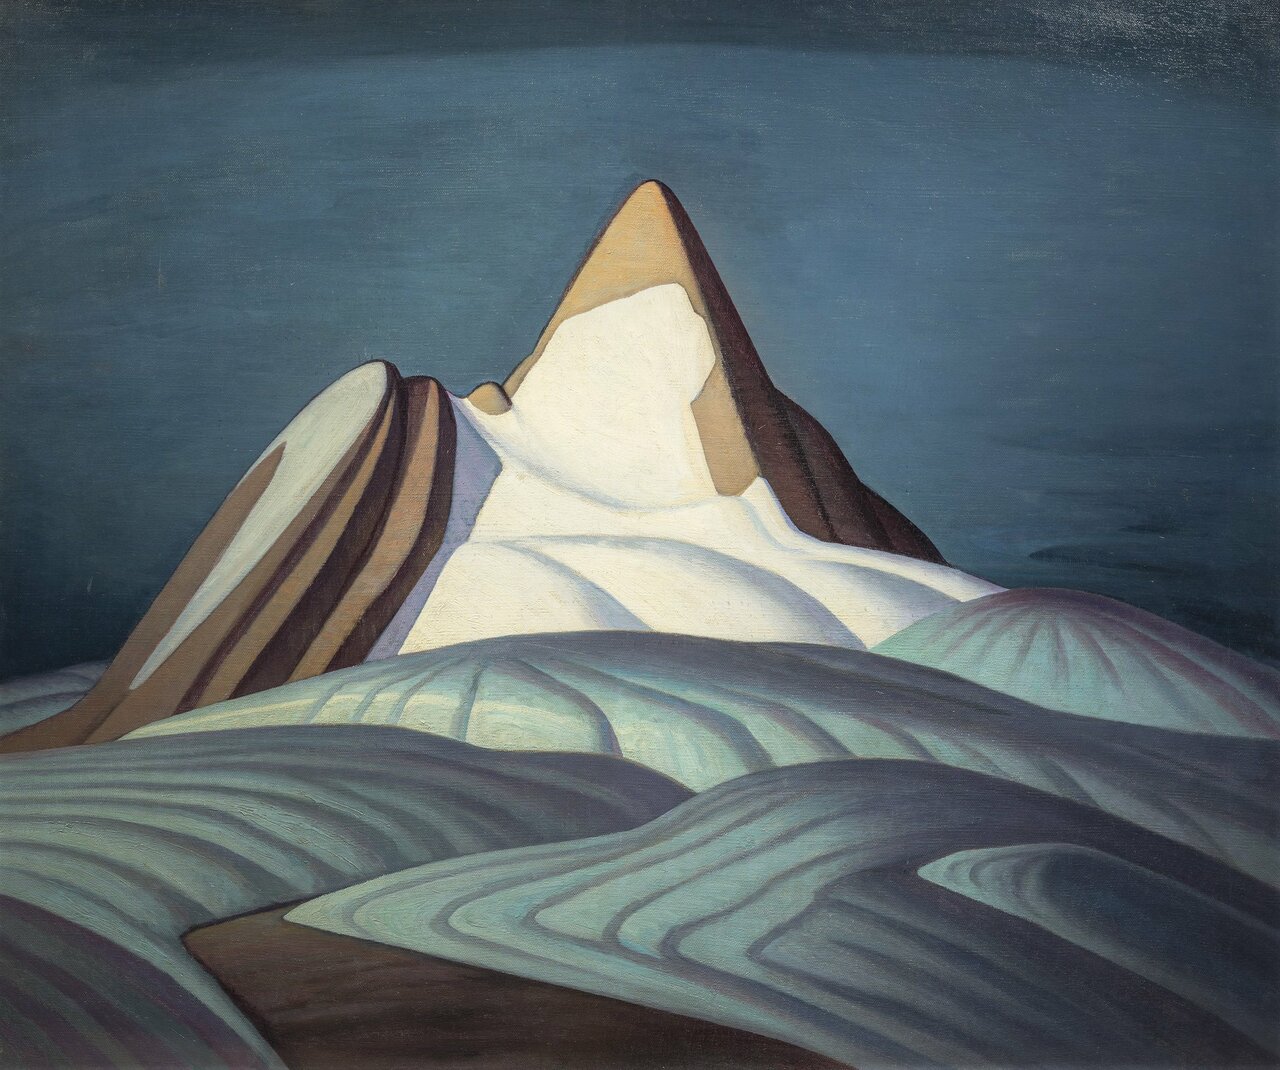 “Isolation Peak” (1930) by #LawrenHarris is a hybrid of real and invented. http://bit.ly/1VShVHF https://t.co/emZIgn0XaR